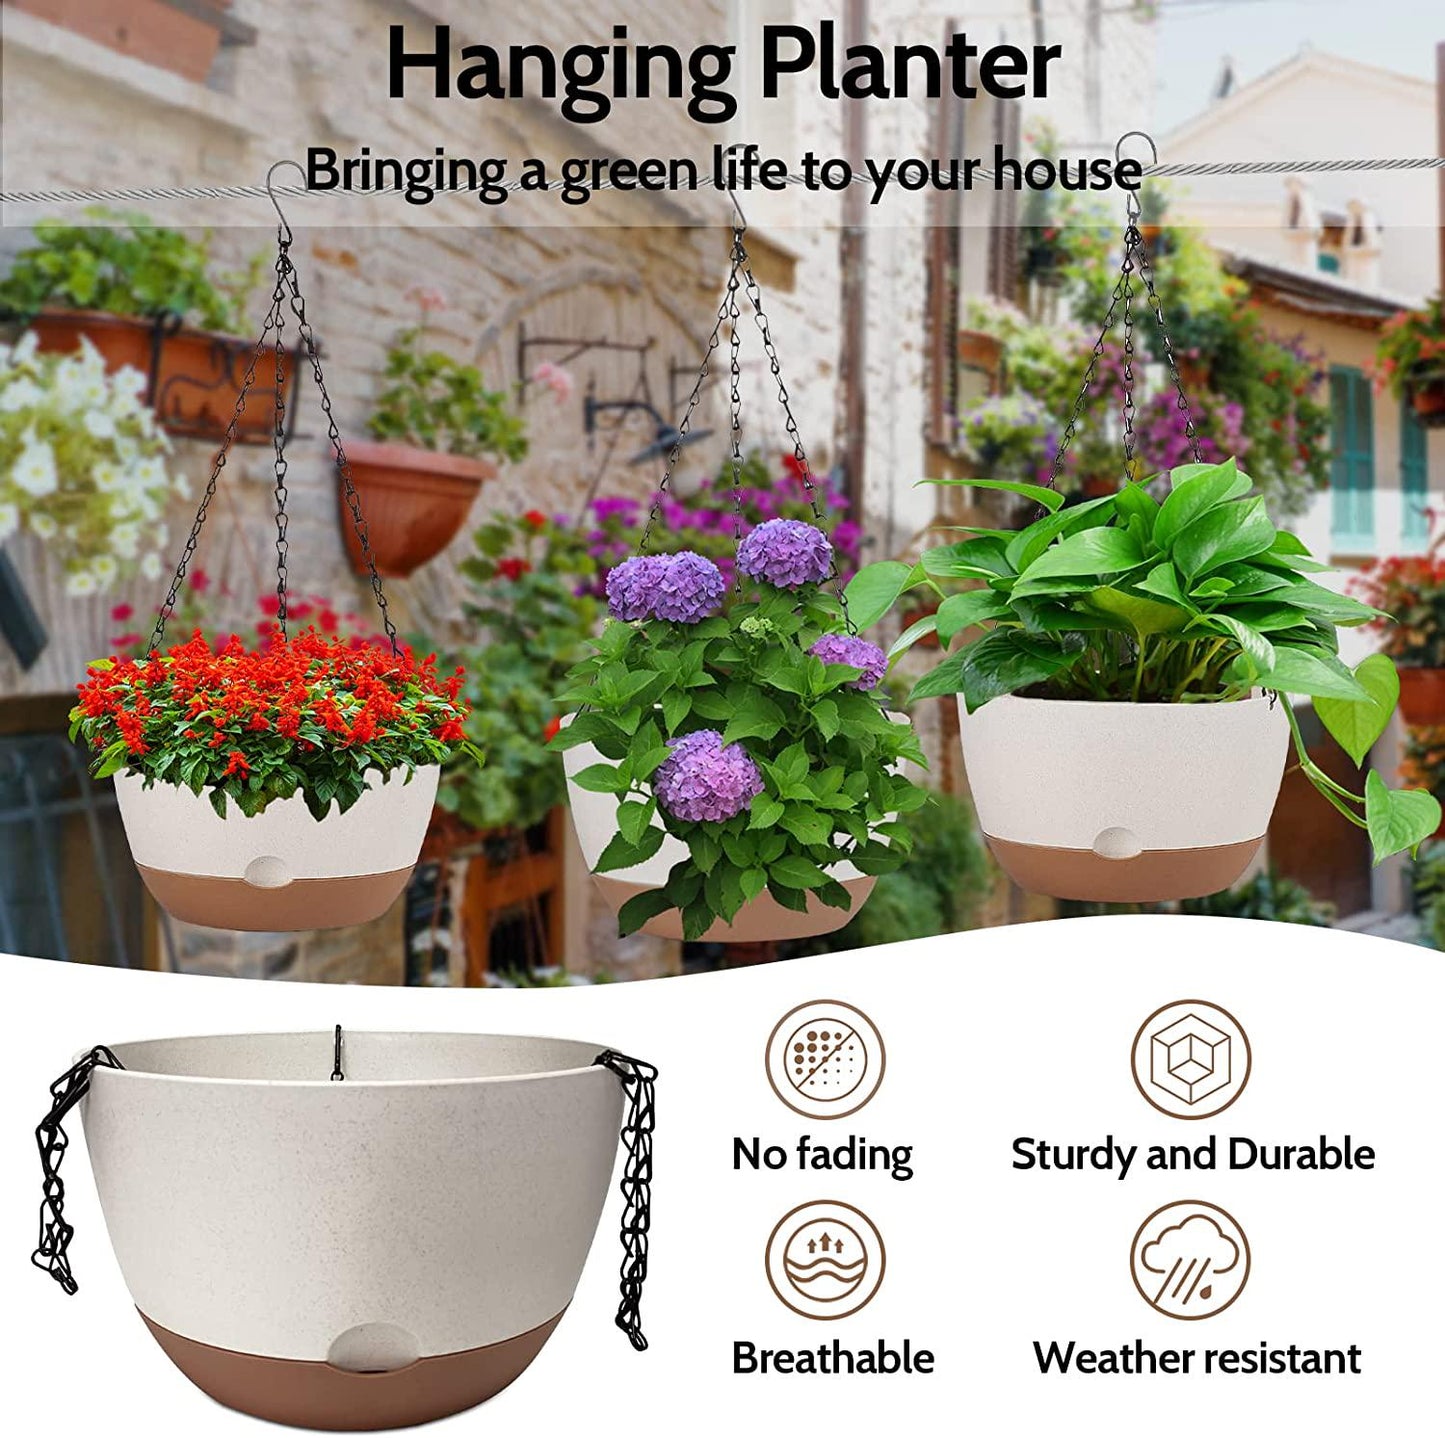 EURCRBU 3 Pack Hanging Planters for Outdoor Indoor Plants, 8.3 Inch Plastic Hanging Flower Pots for Outside, Outdoor Hanging Planter with Drainage Holes and Removable Saucer for Garden Home (Beige)